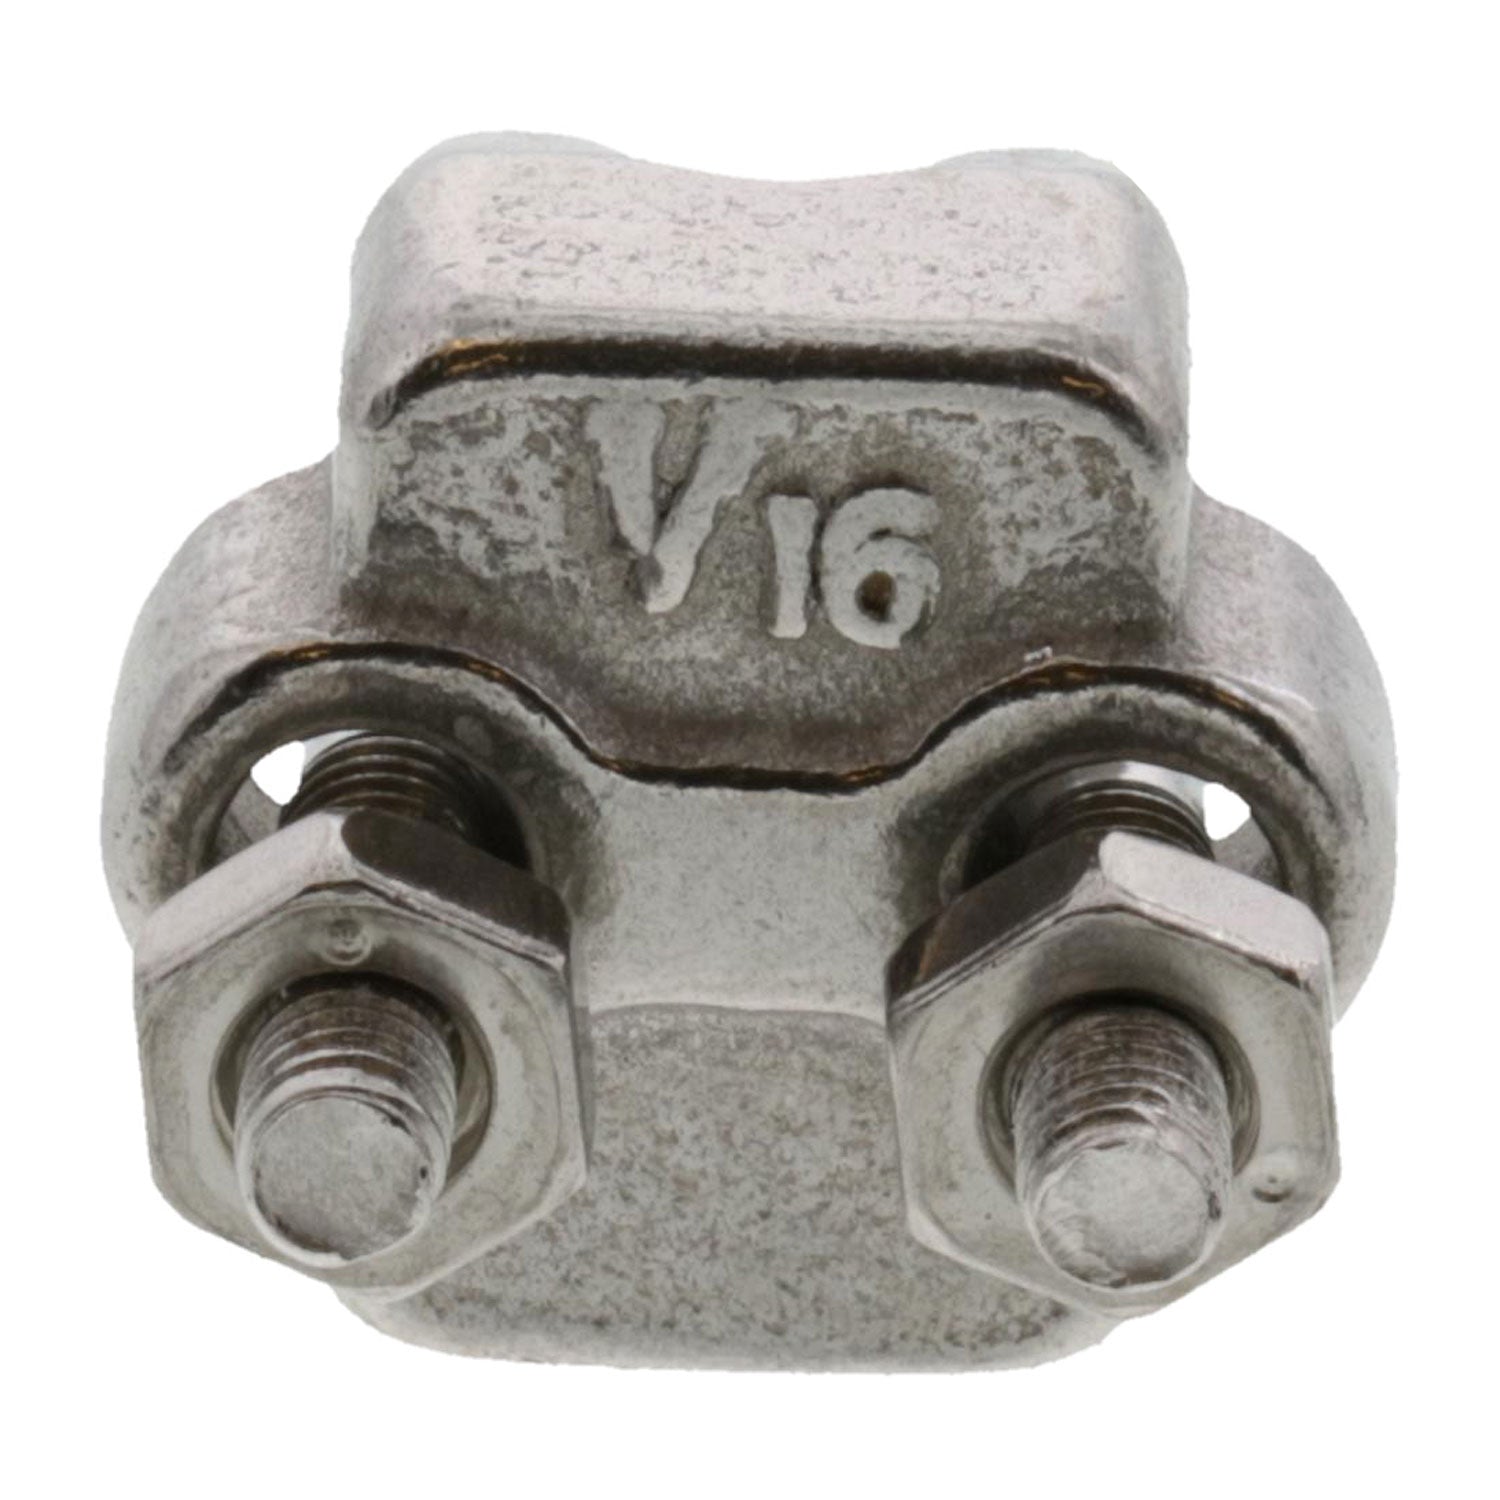 Type 316 Stainless Steel Cast Wire Rope Clip